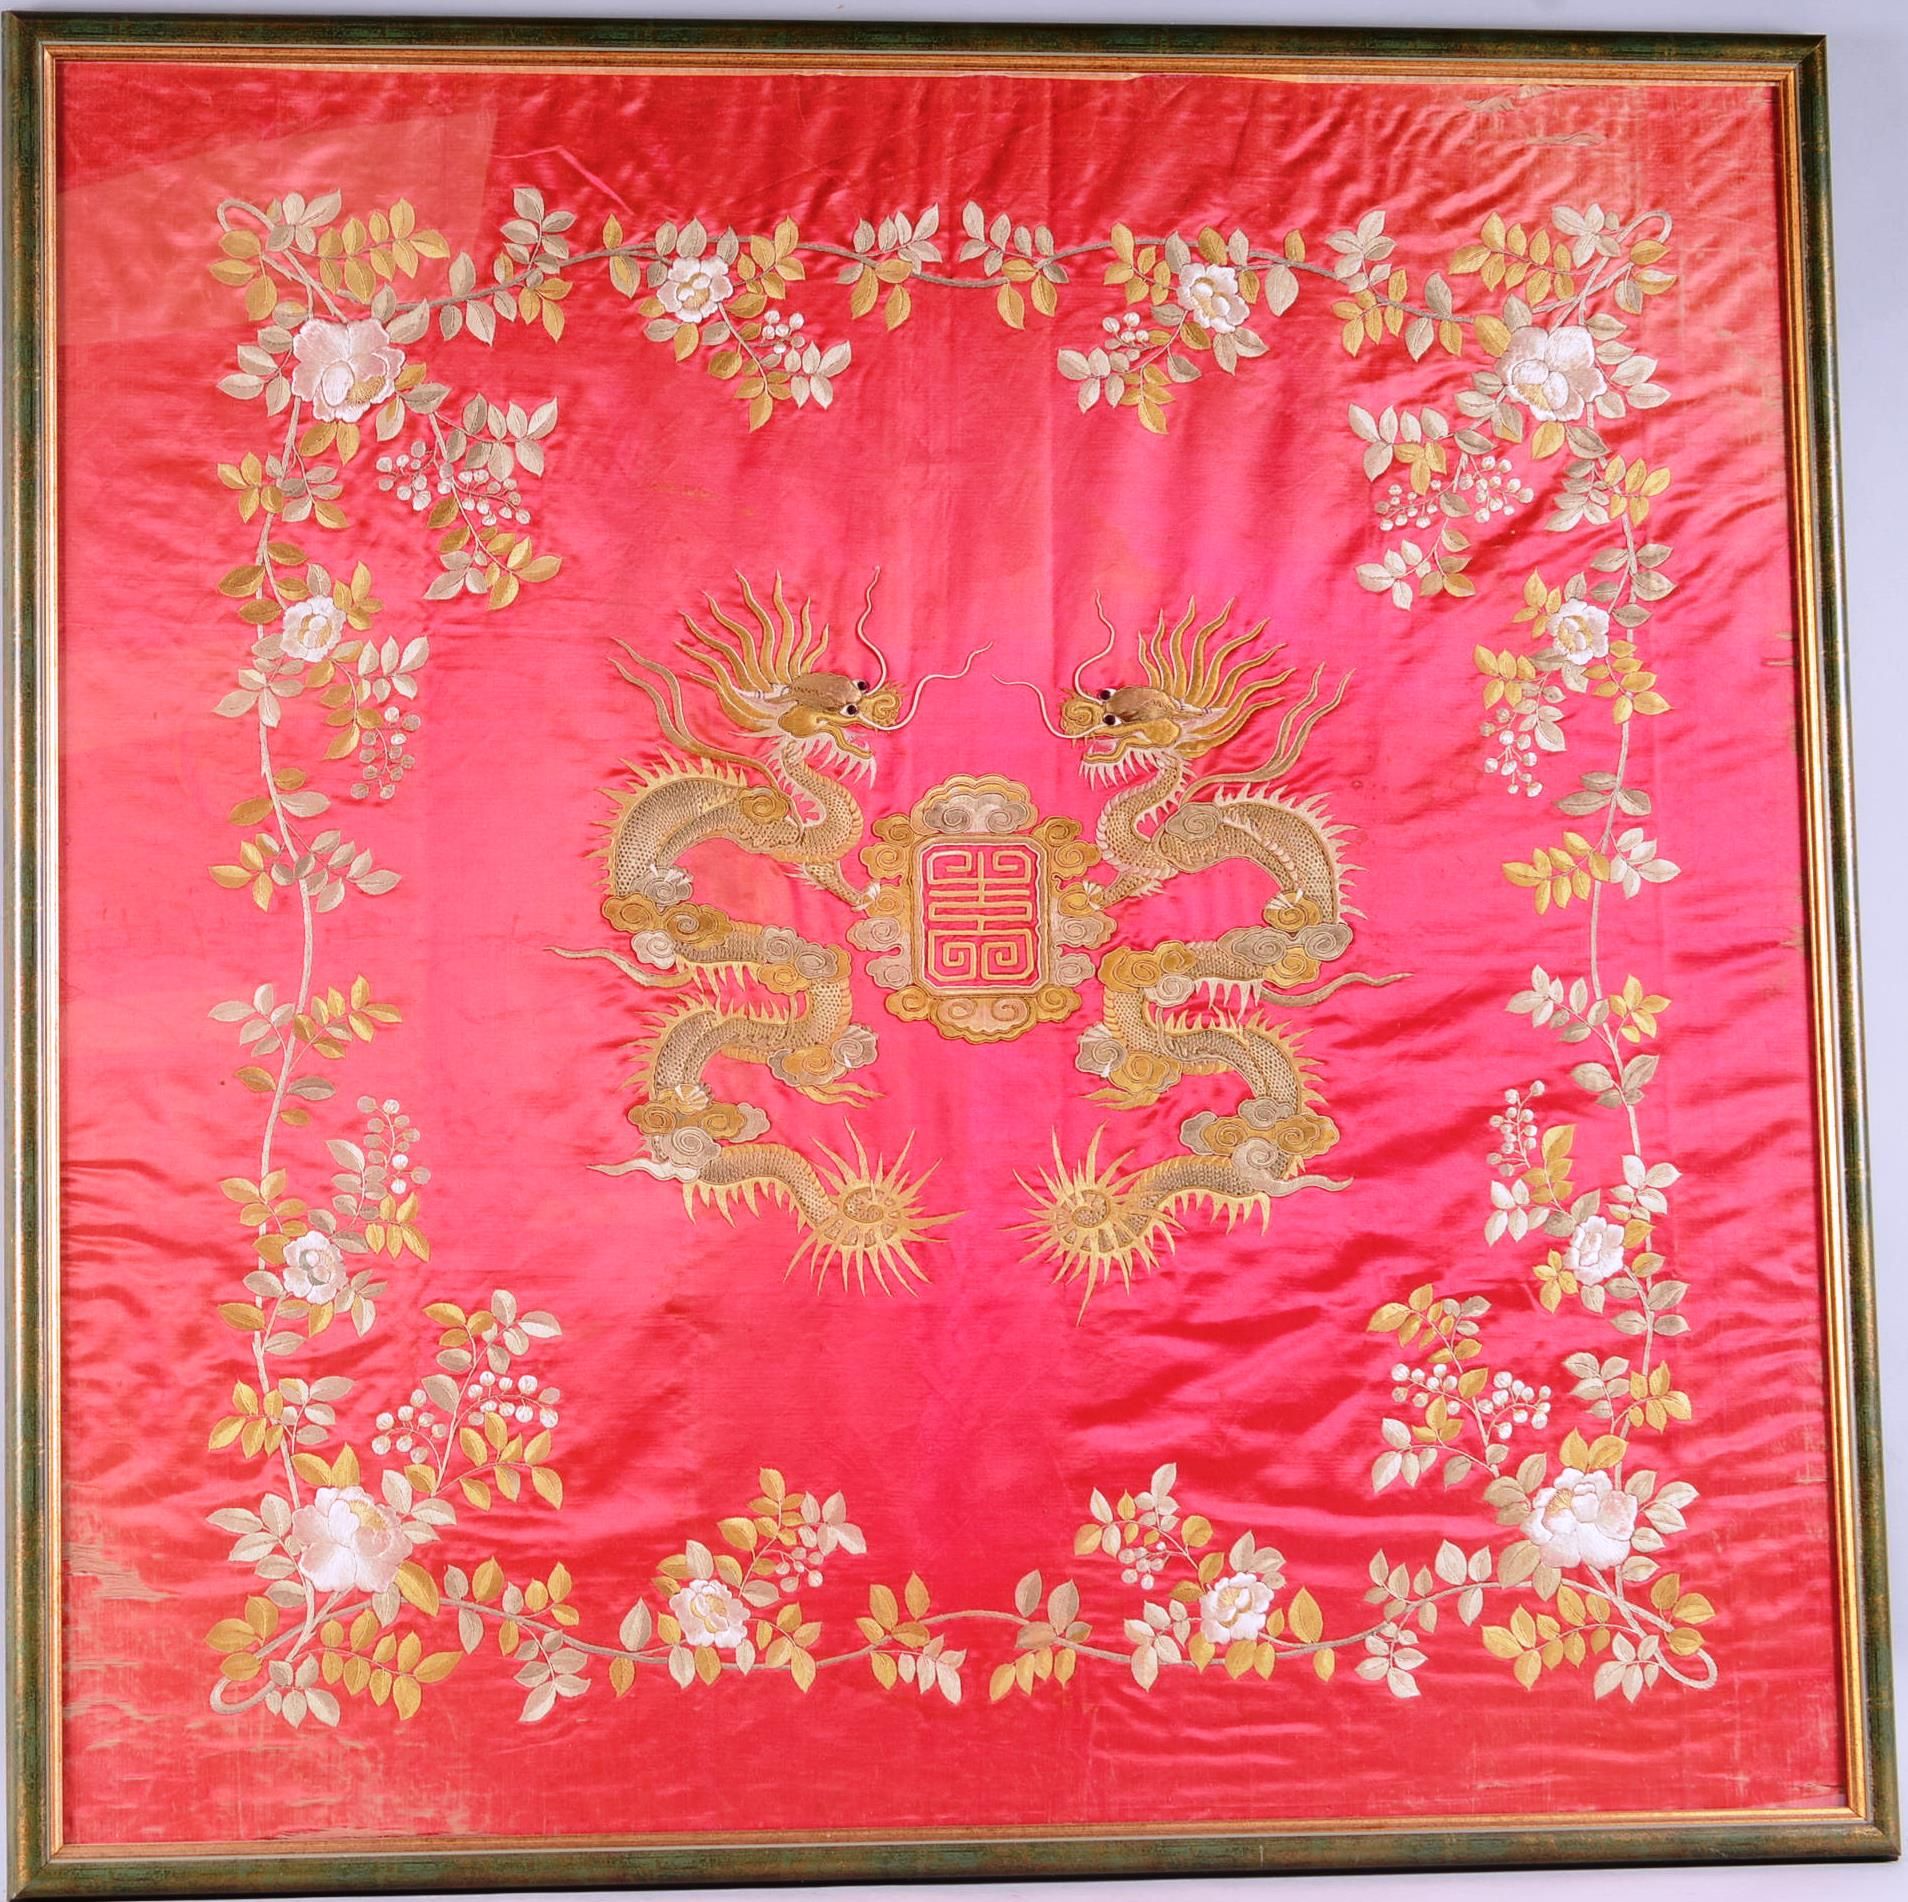 Soierie à motif brodé de deux dragons CHINA.

Silk with embroidered pattern of t&hellip;